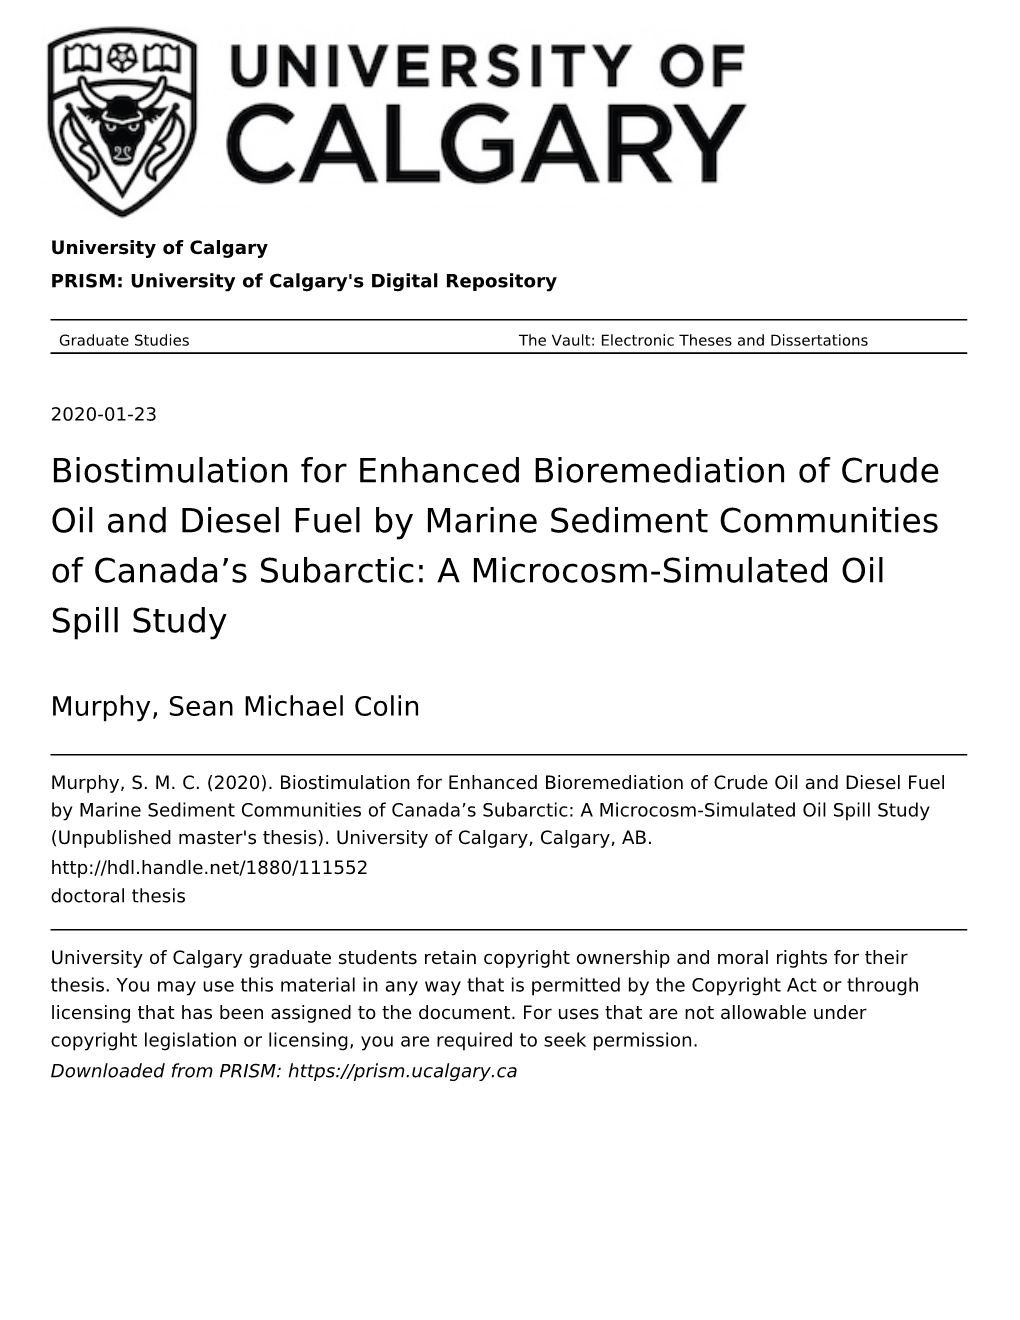 Biostimulation for Enhanced Bioremediation of Crude Oil and Diesel Fuel by Marine Sediment Communities of Canada’S Subarctic: a Microcosm-Simulated Oil Spill Study